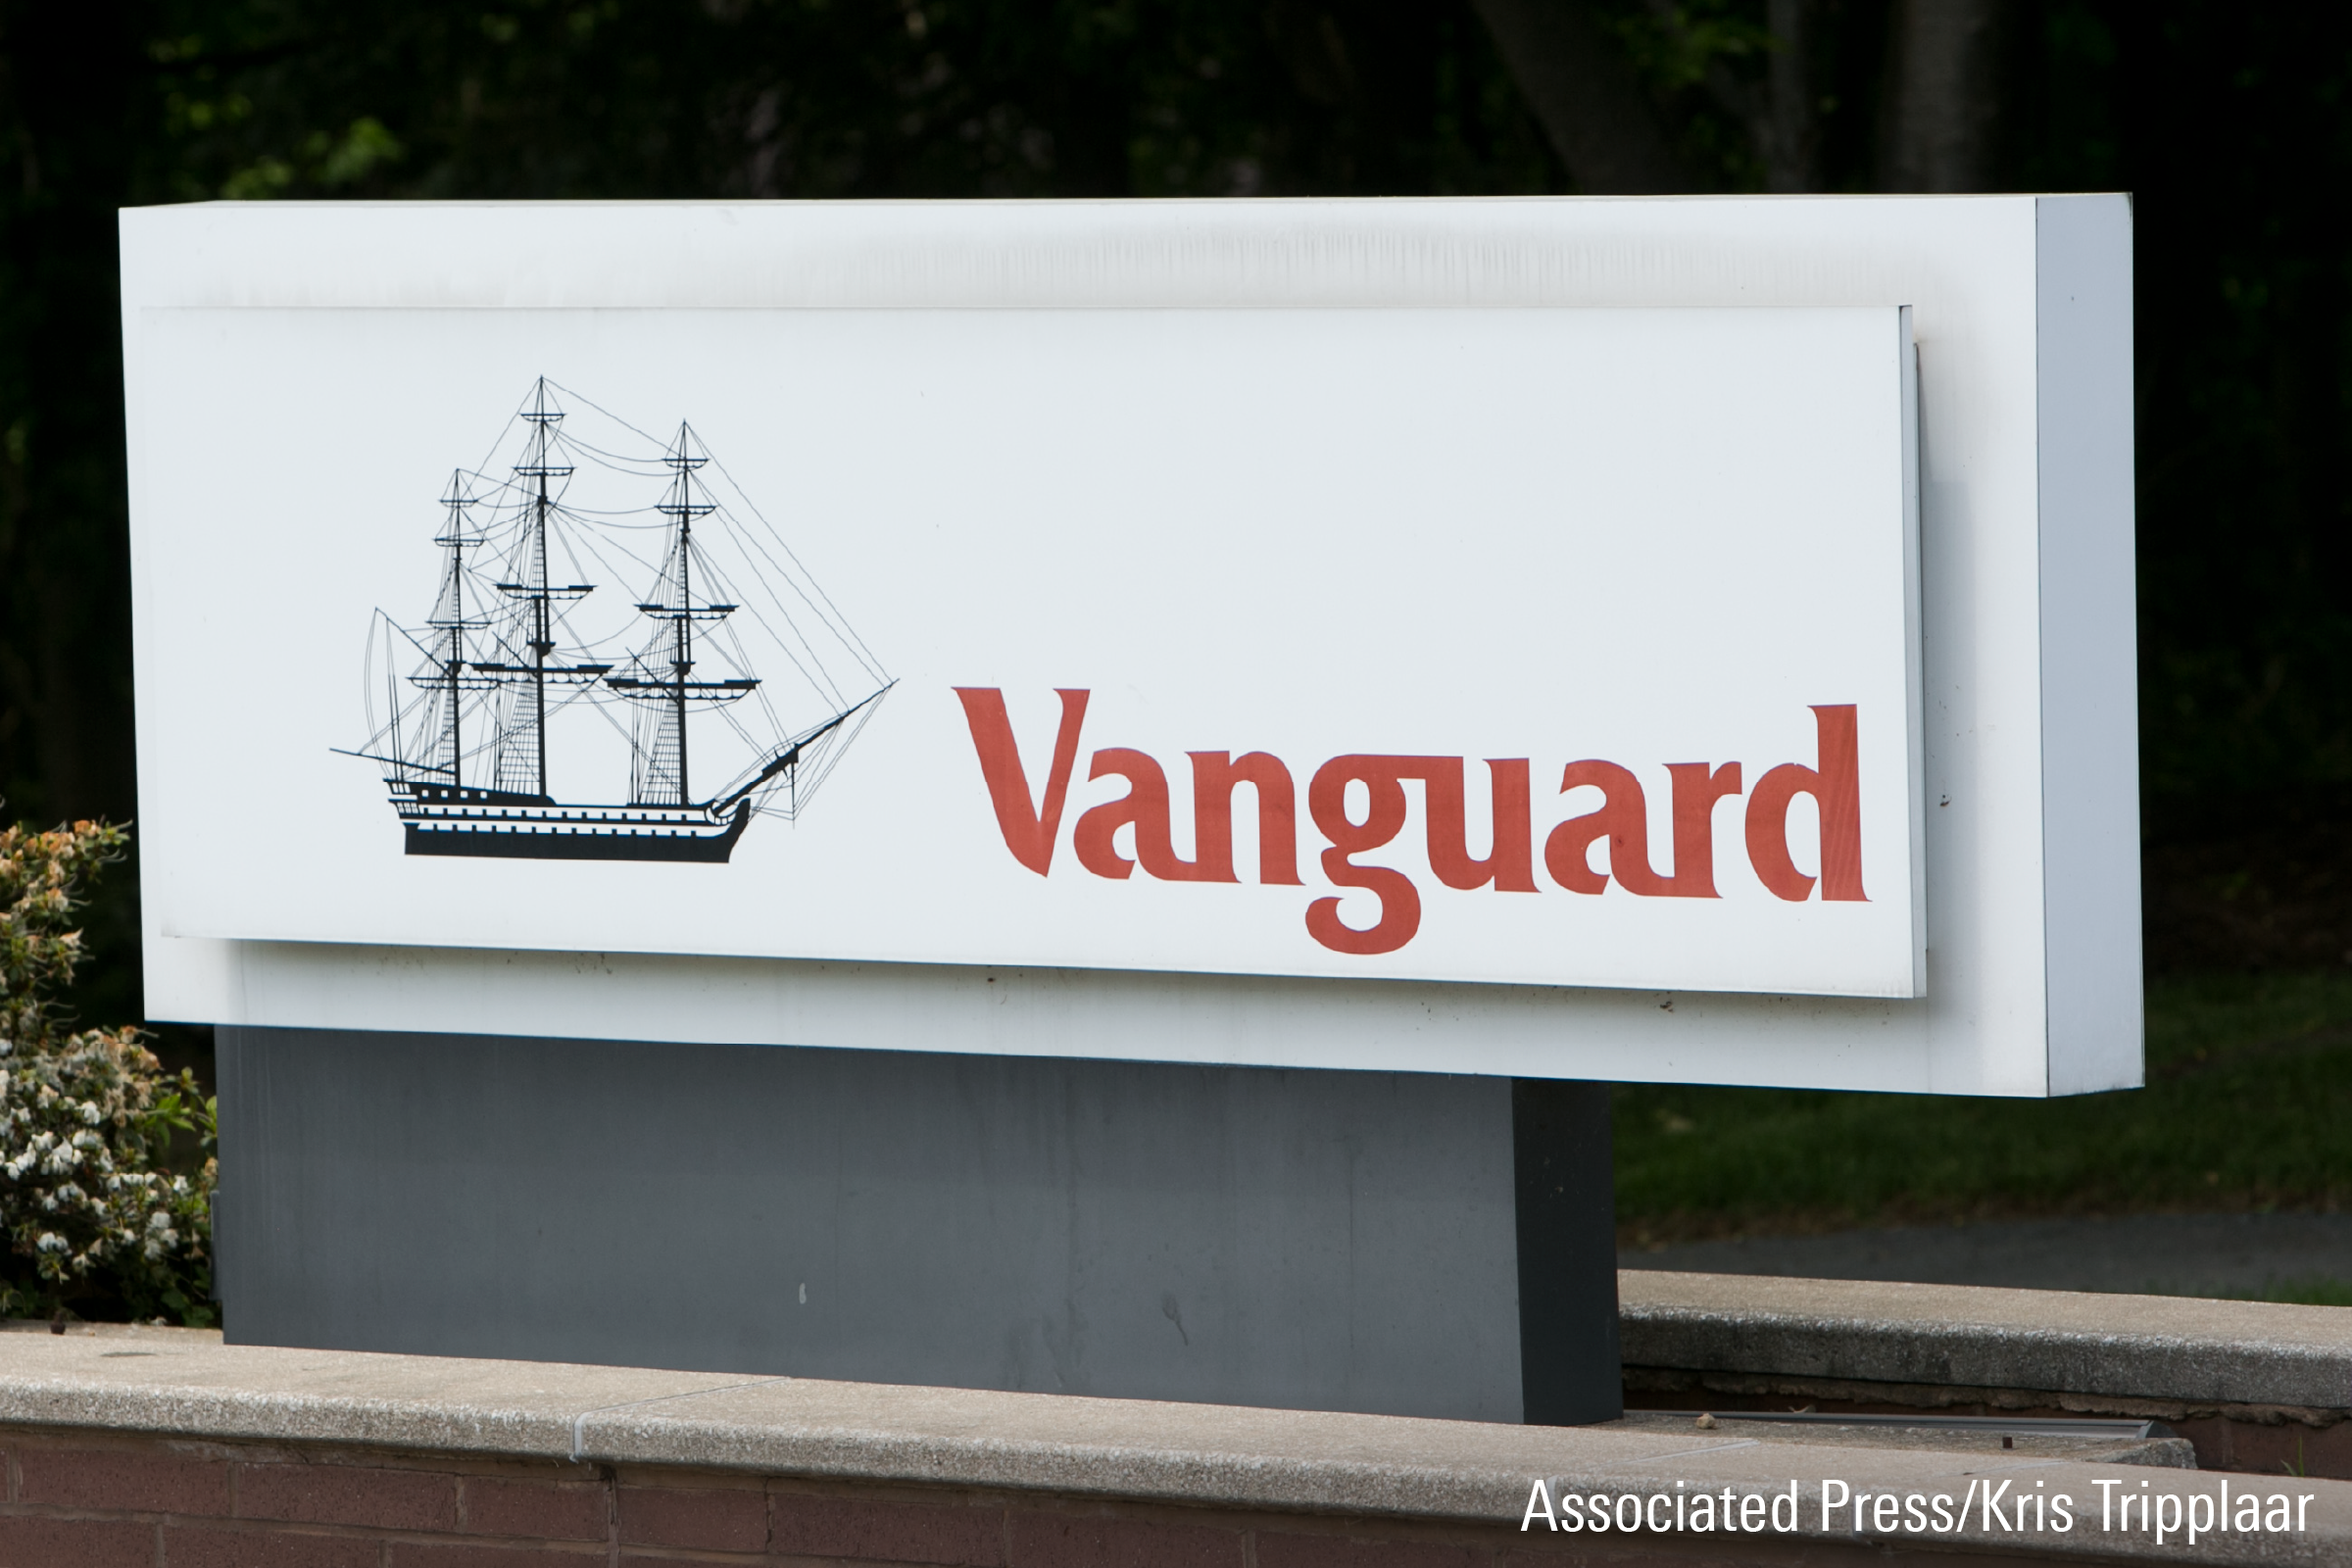 A photograph featuring a Vanguard's logo sign outside its headquarter in Malvern, Pennsylvania.